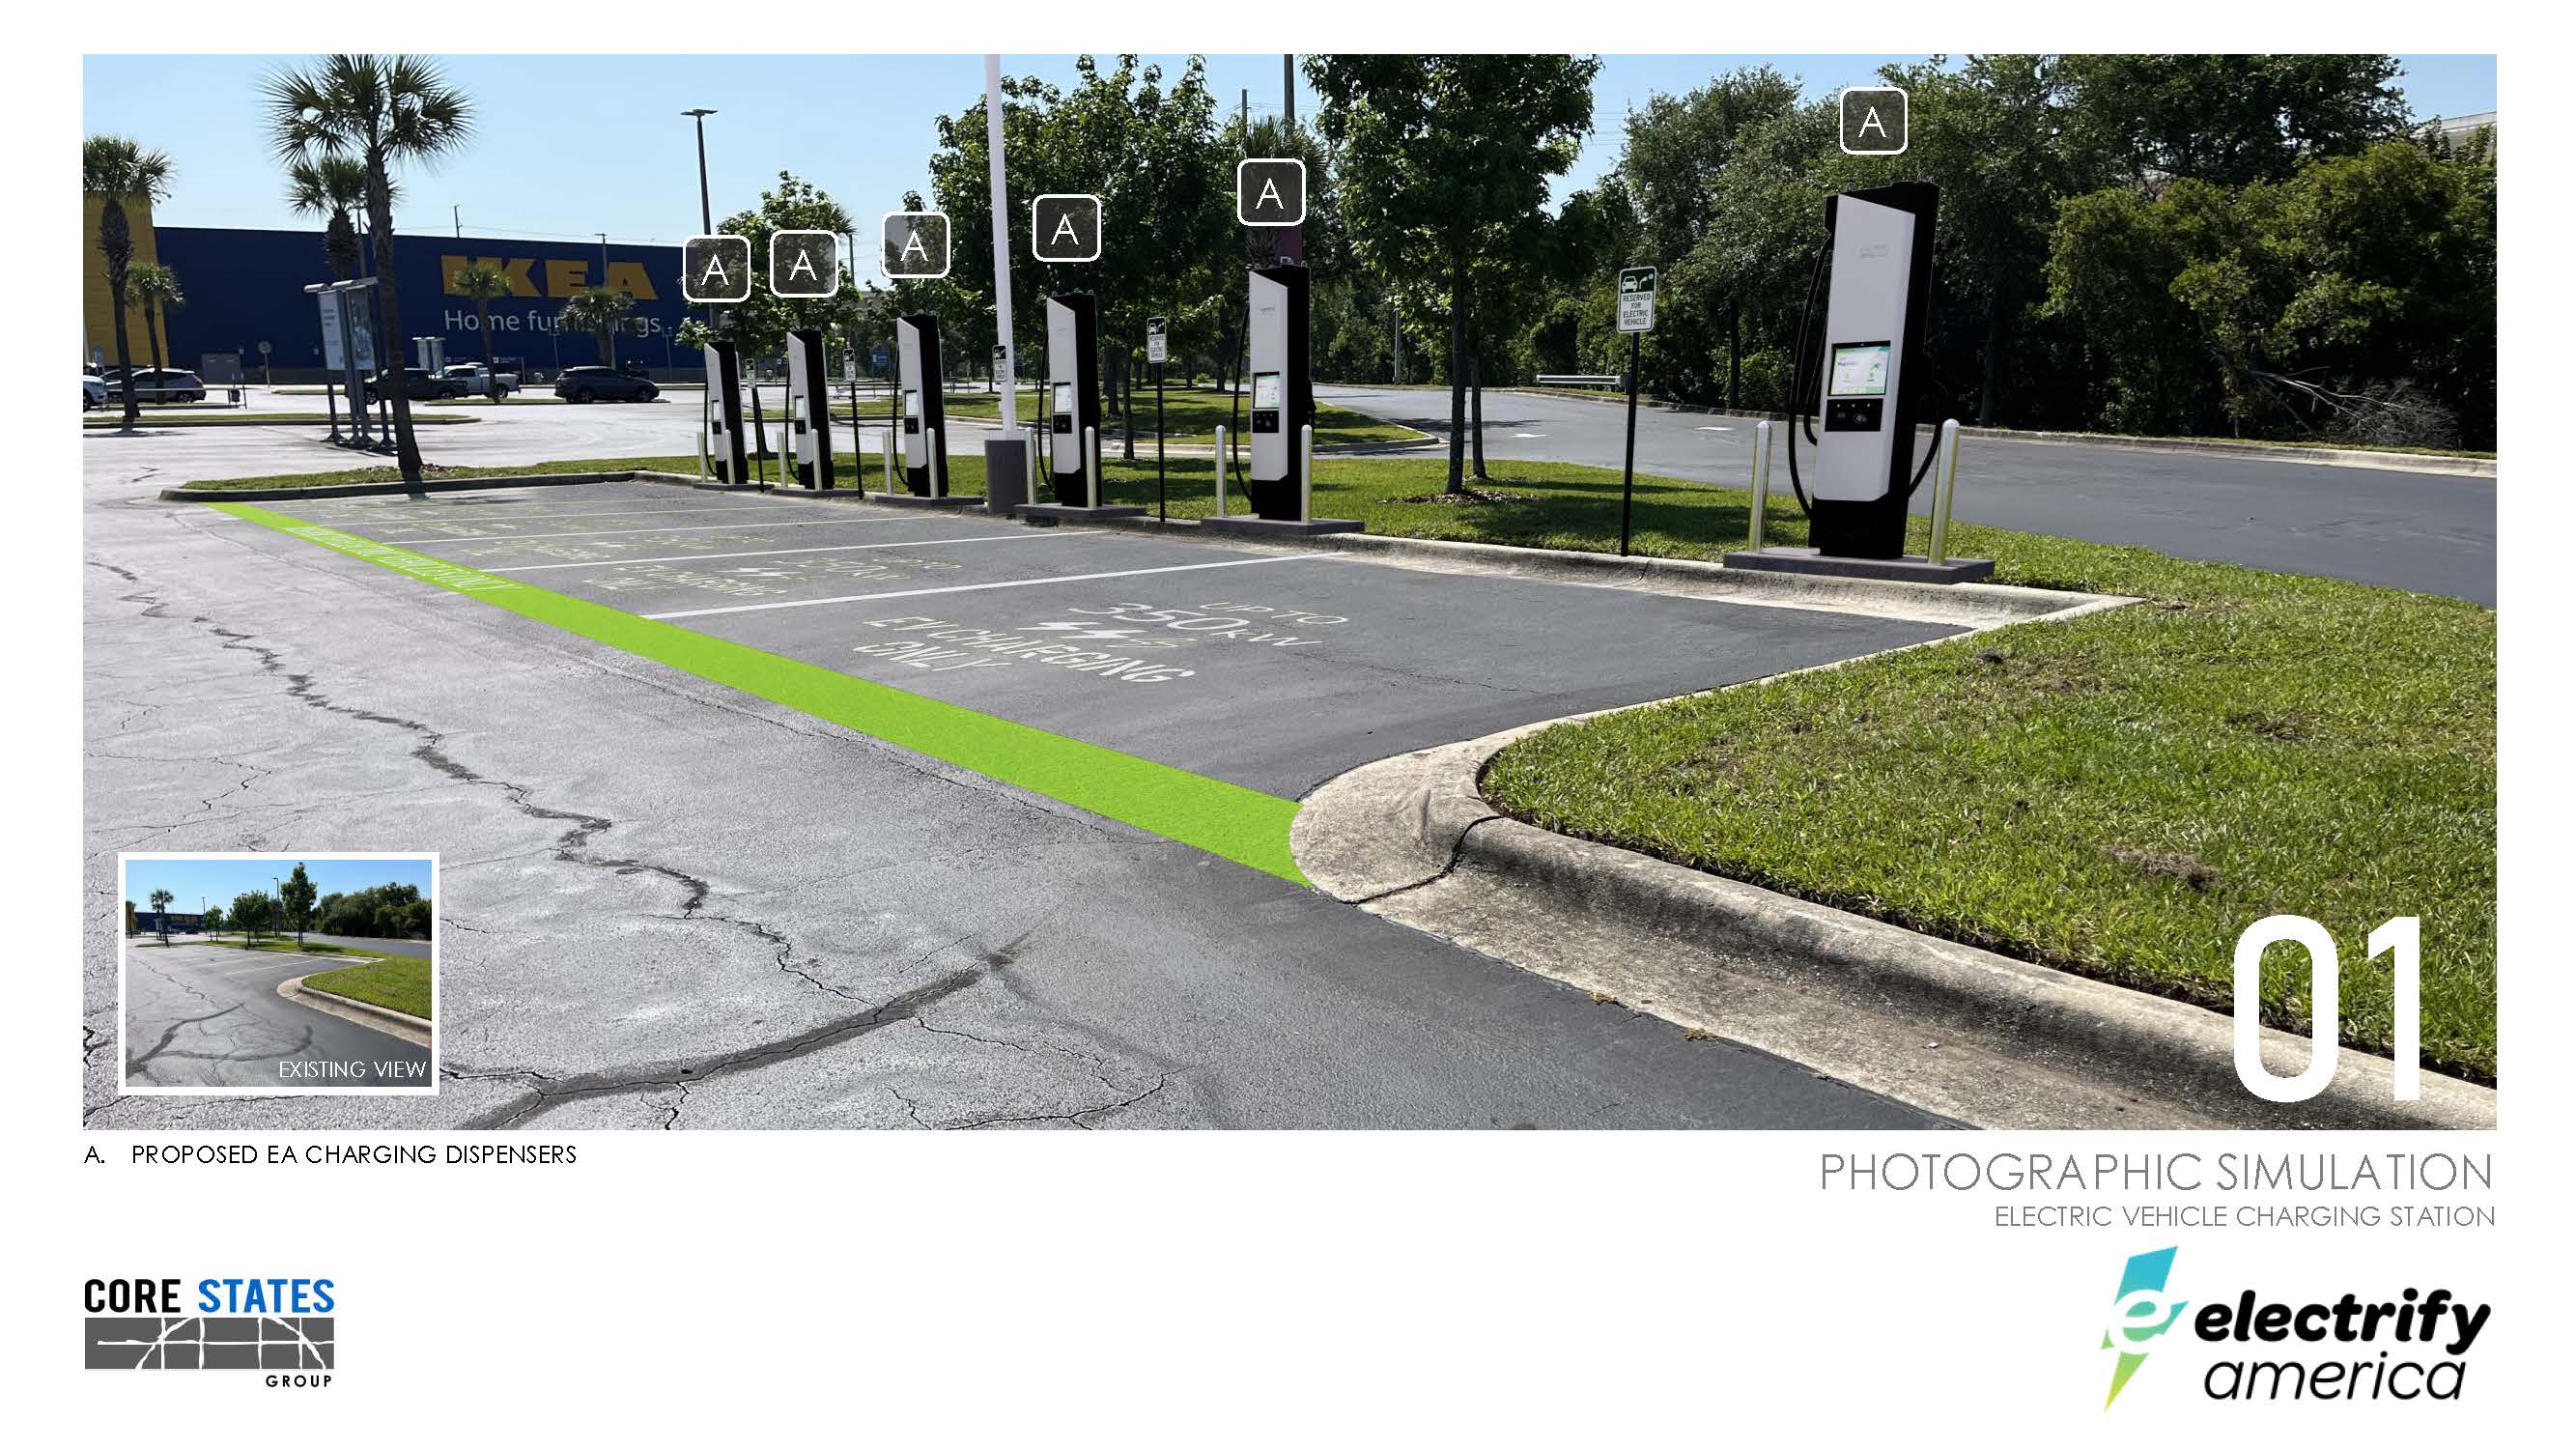 Porsche Taycan Electrify America will install ultrafast EV chargers at over 25 IKEA US locations Tampa, FL jpe